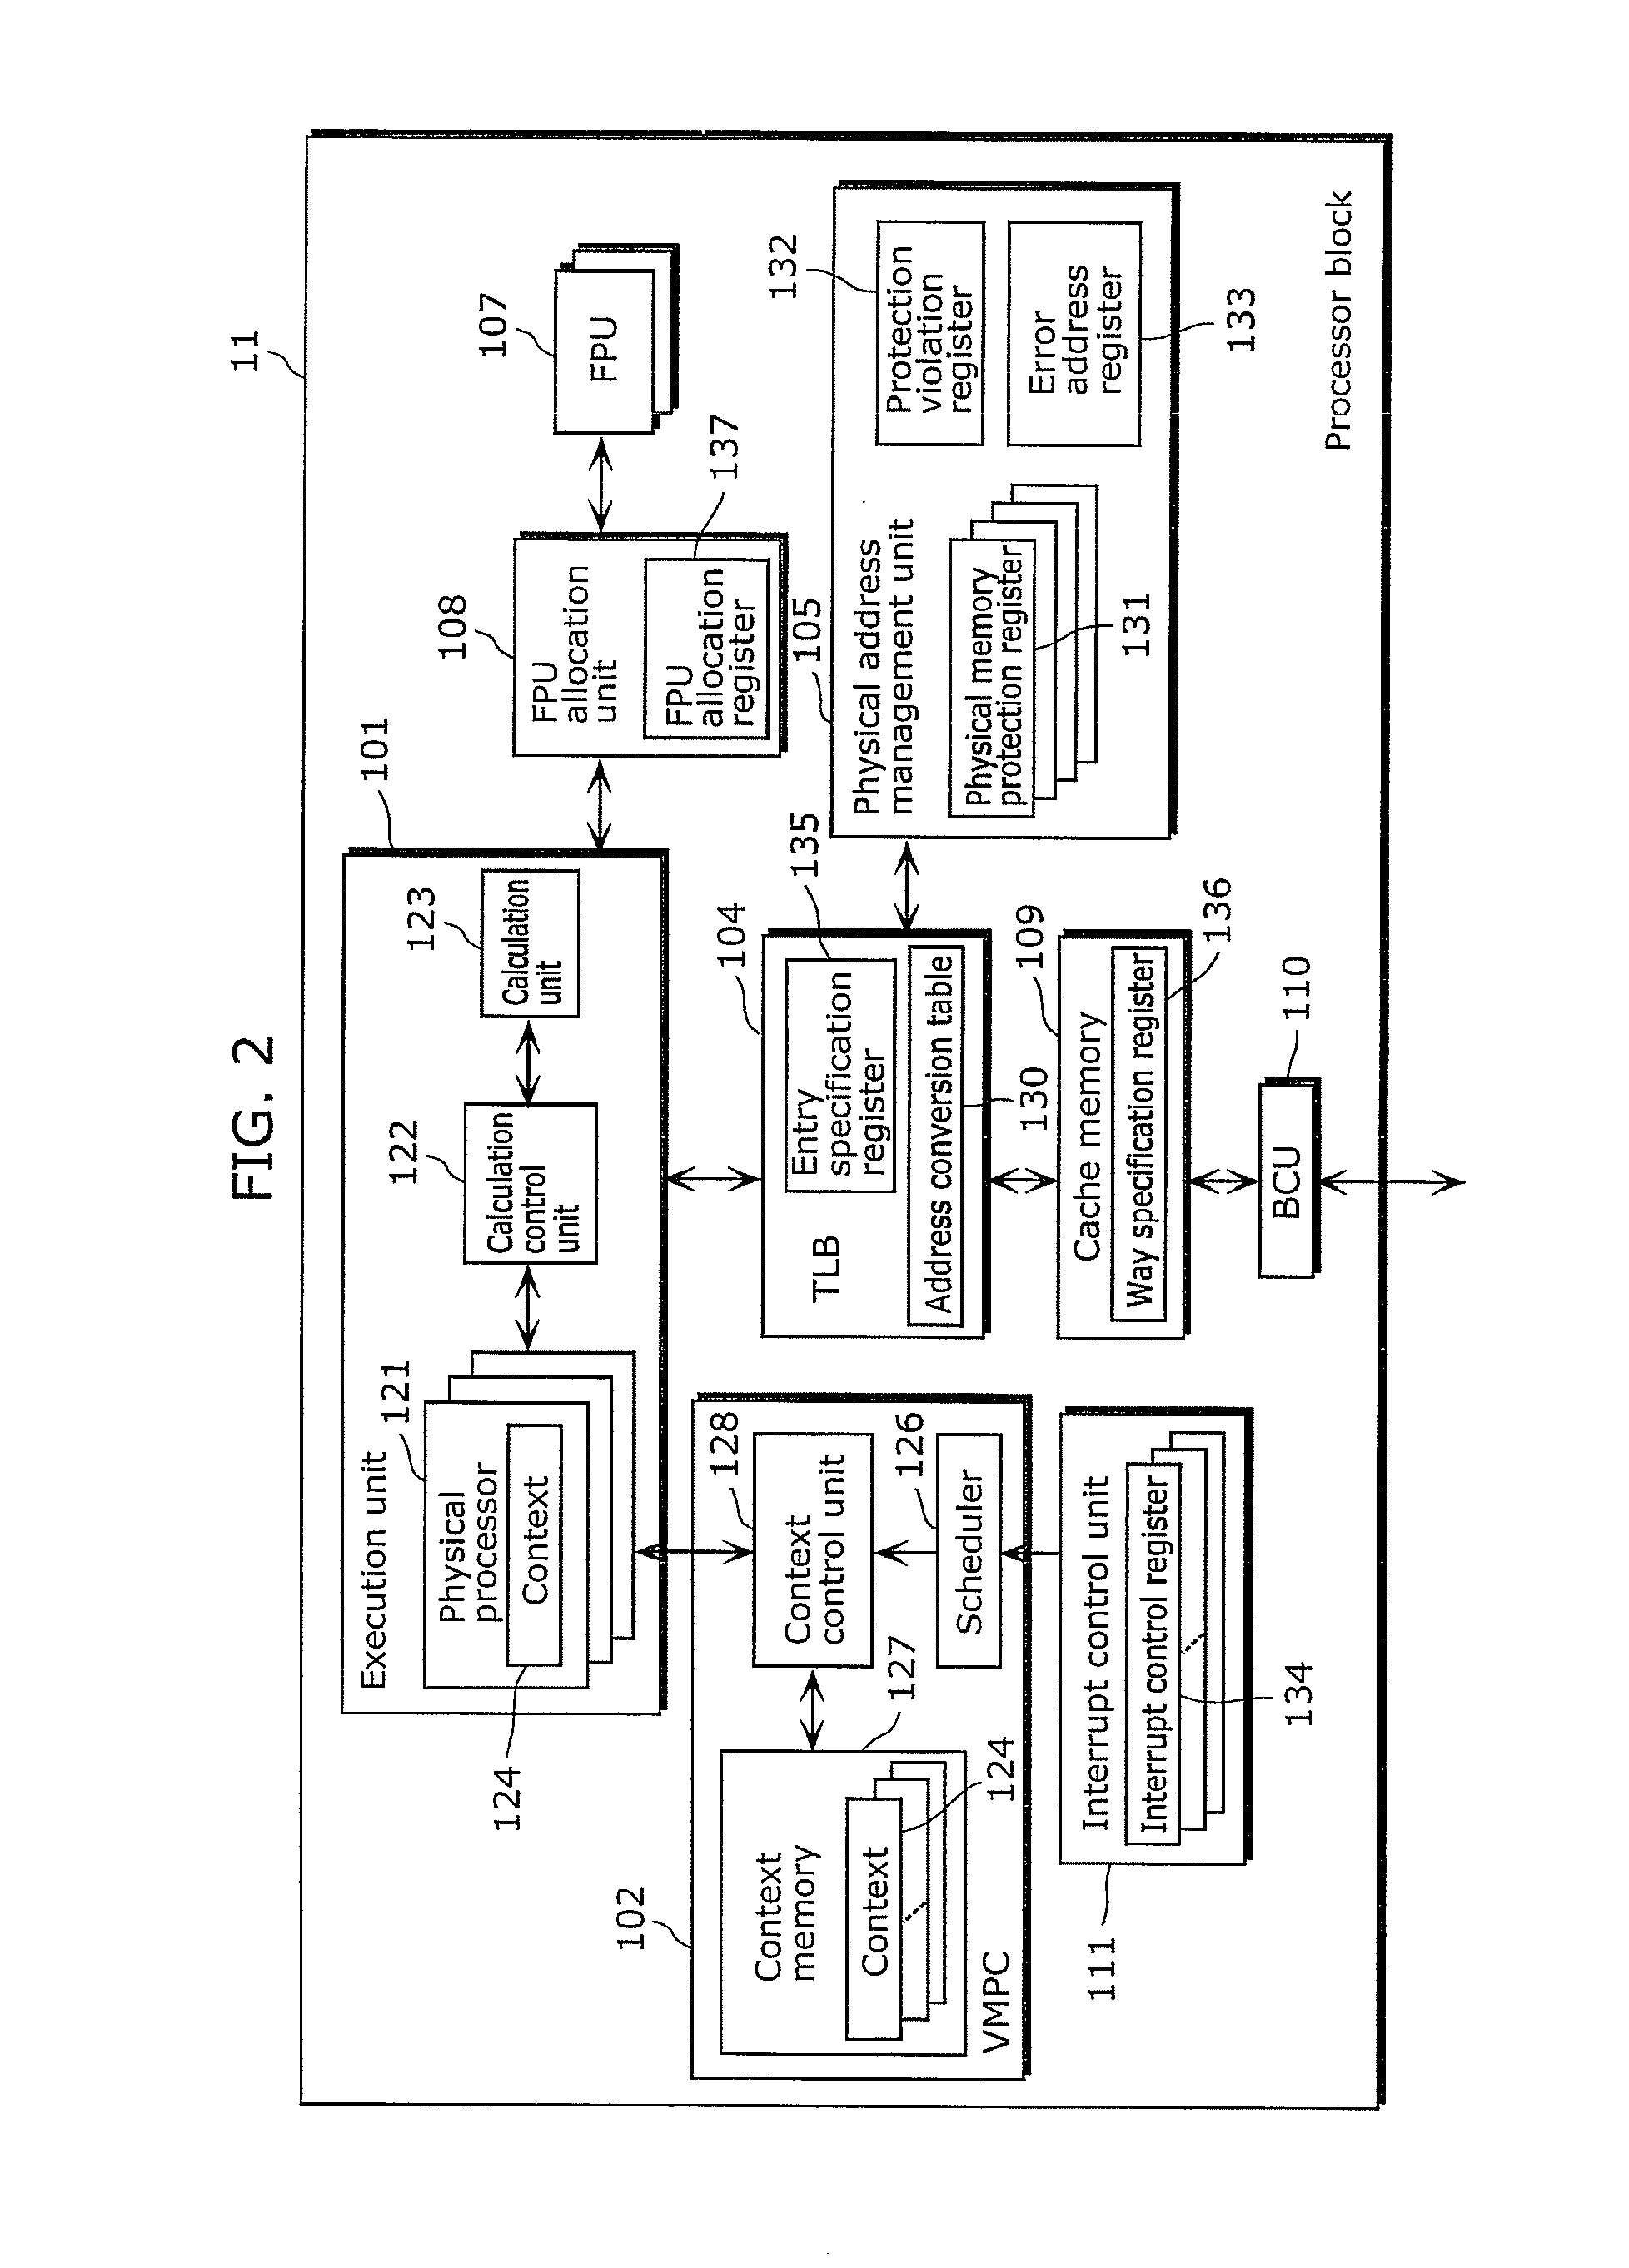 Multithread processor and digital television system